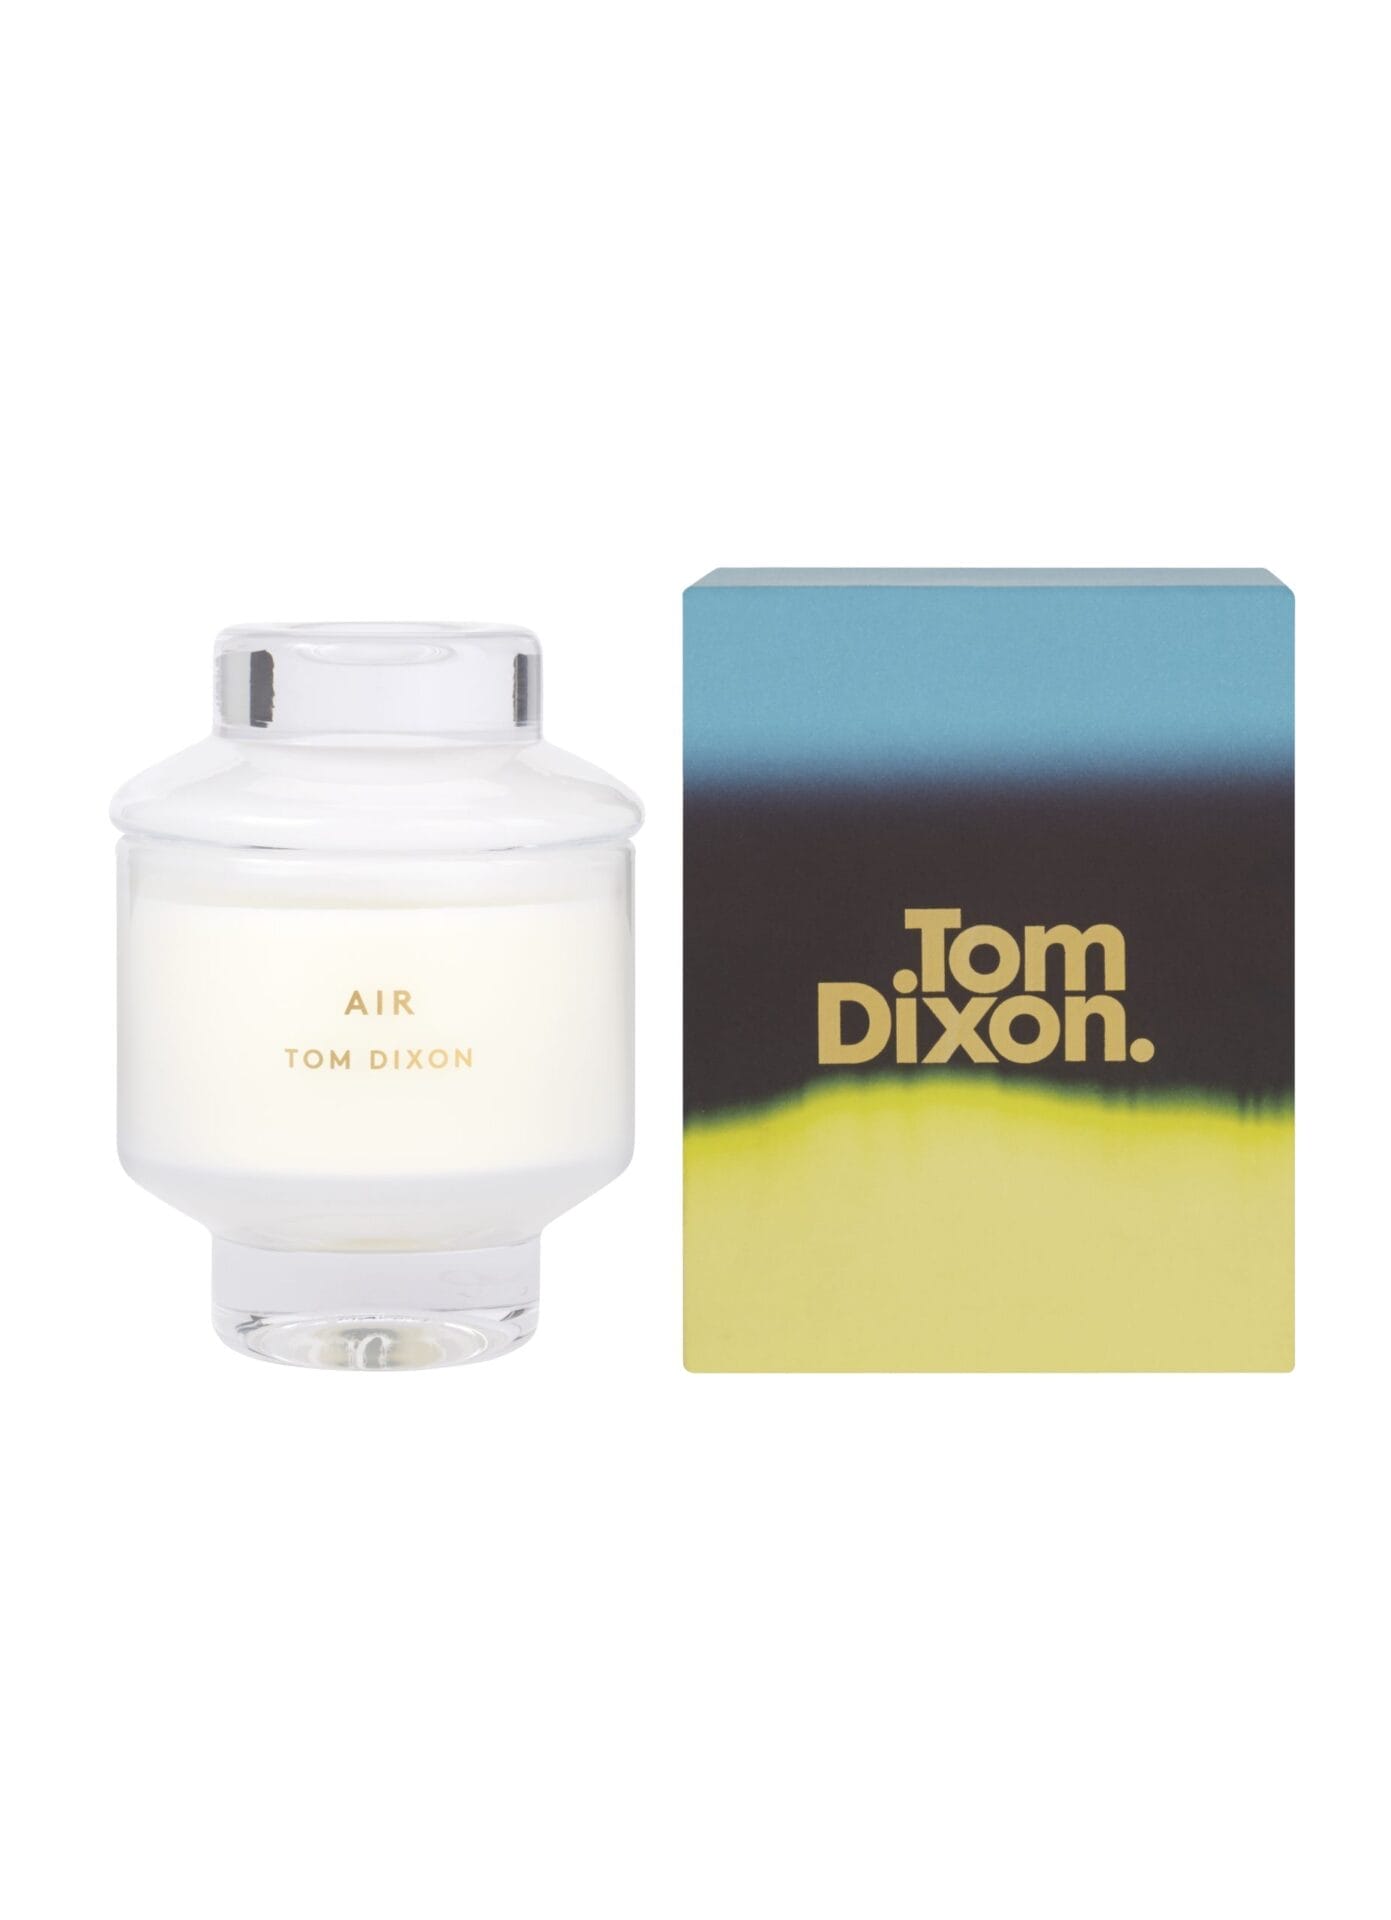 Scent Medium Air, Natural and Paraffin Mix Wax, White Glass